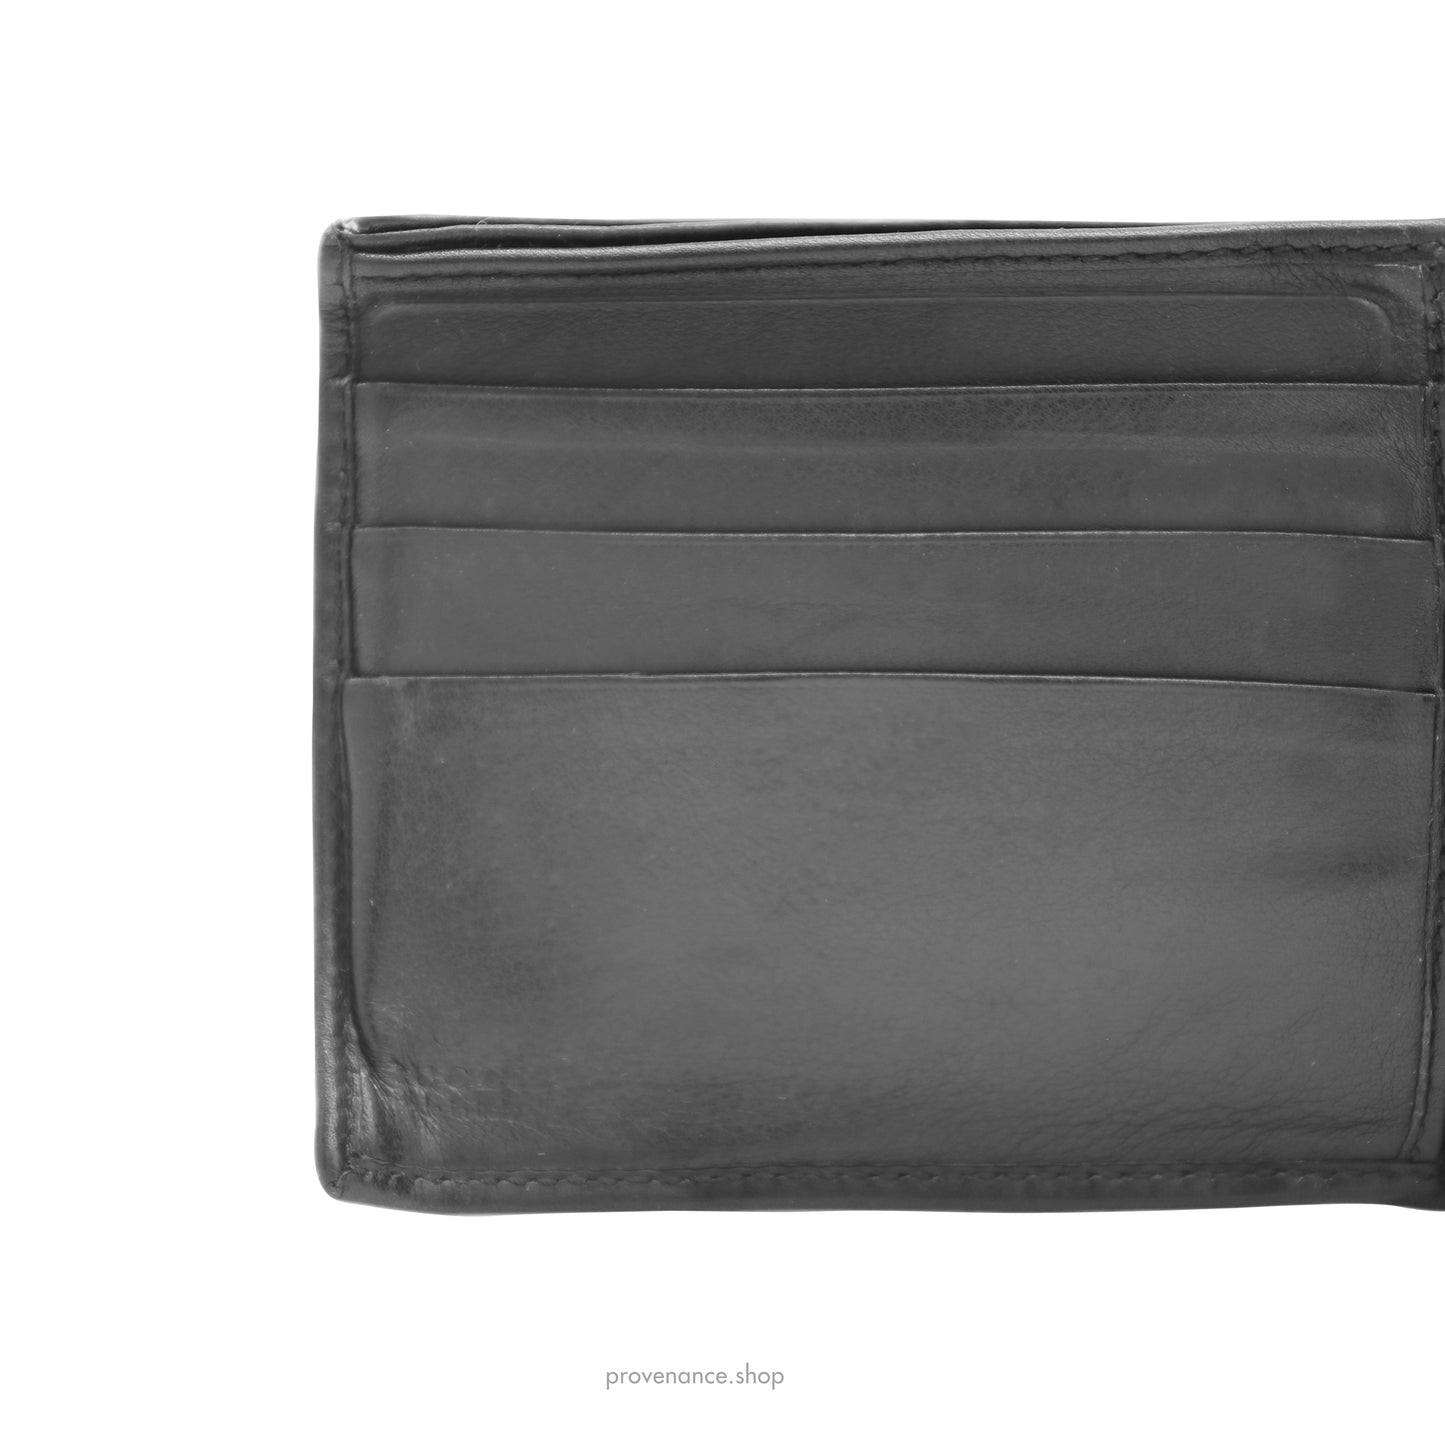 Gucci Bifold Wallet - Black Leather